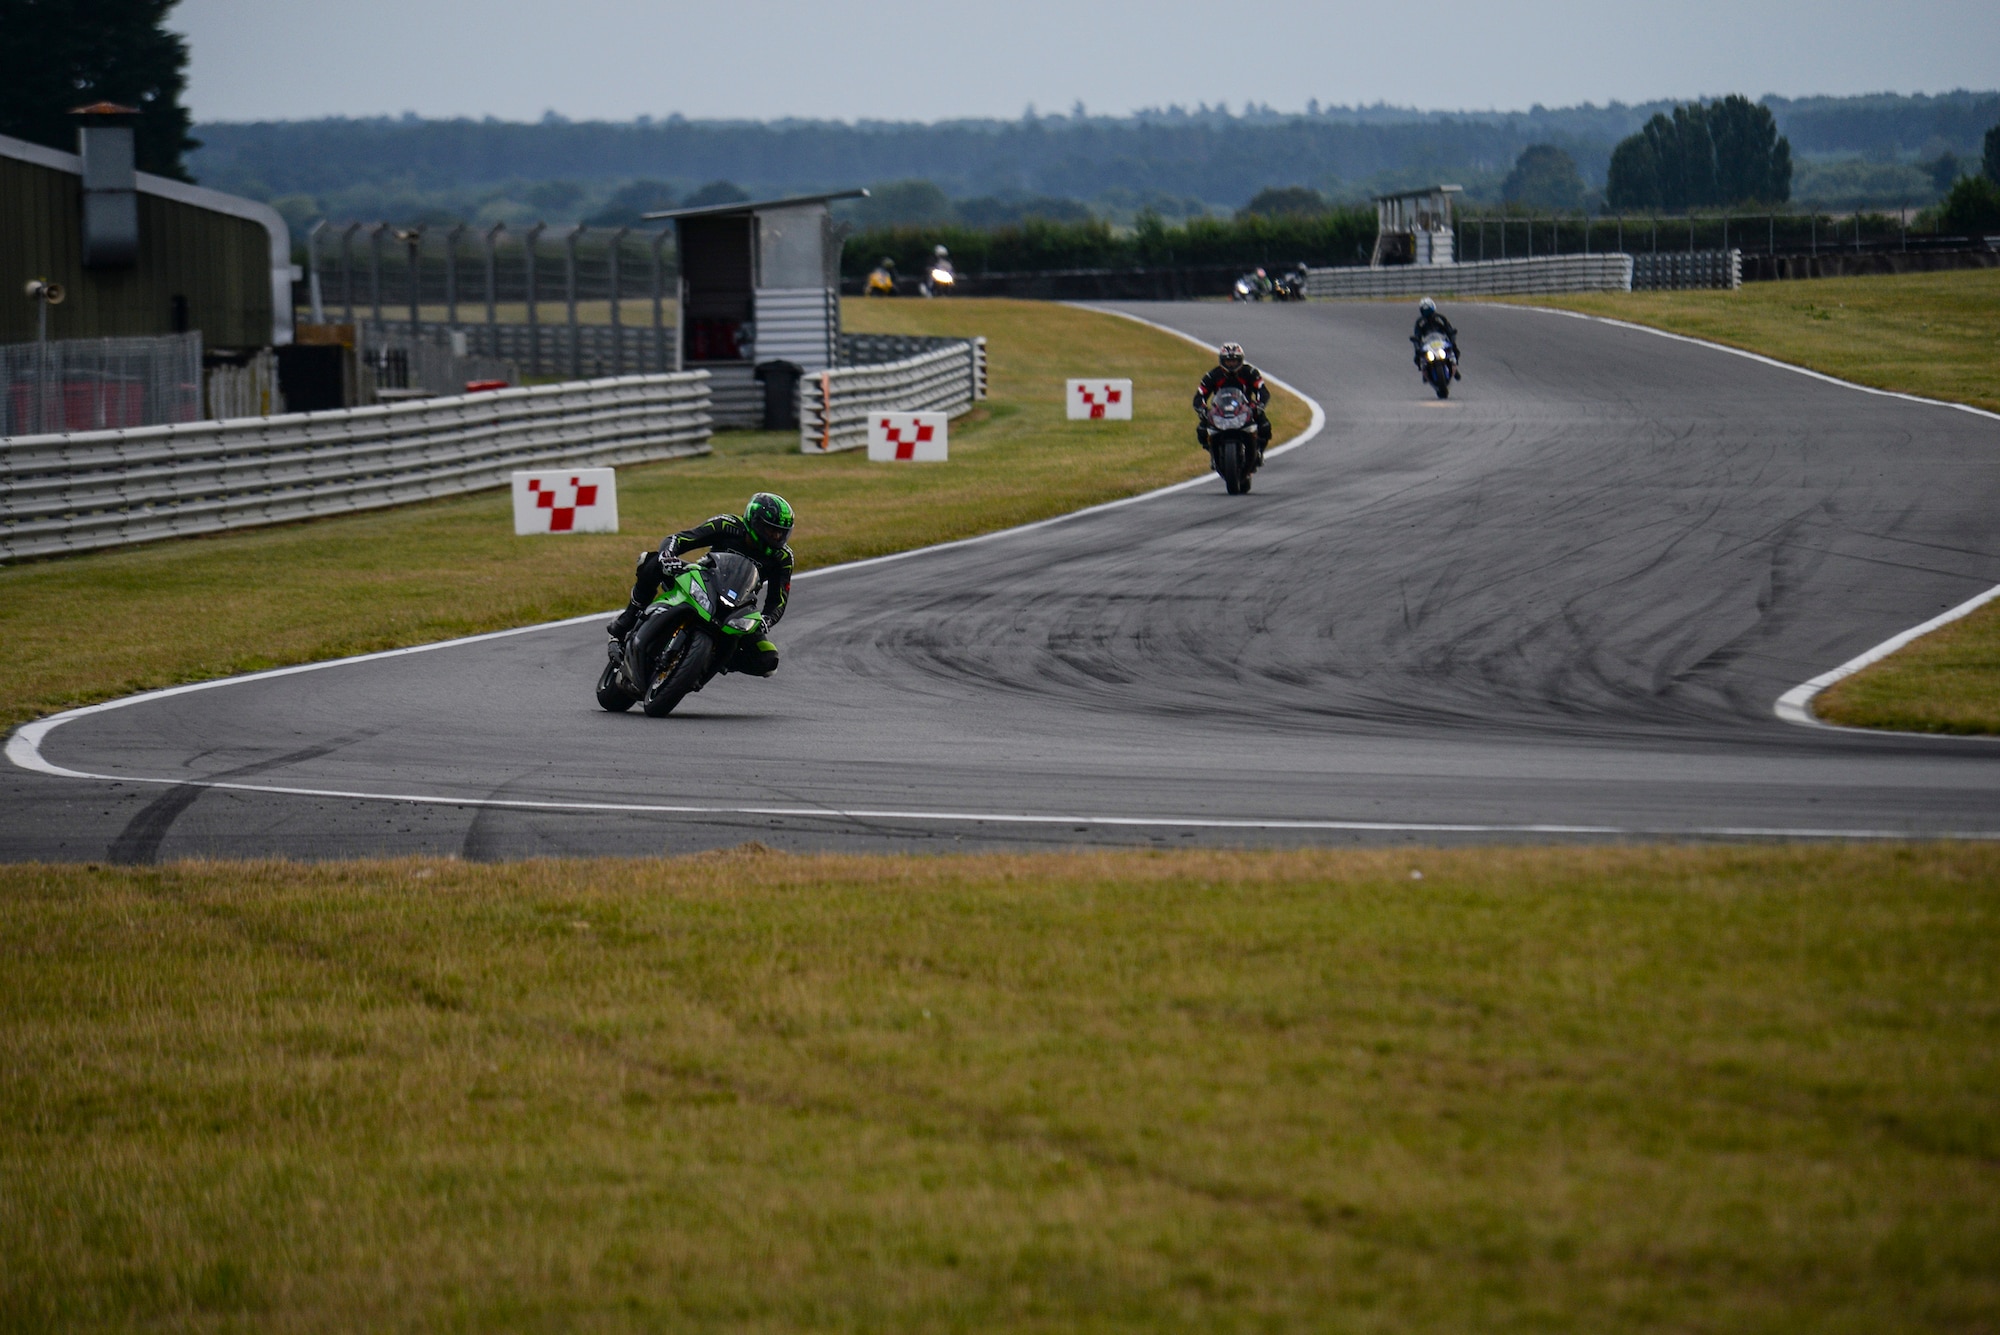 Participants in the Military Track Day ride their motorcycles July 26, 2016, at Snetterton Circuit in Norwich, England. Motorcycle safety instructors along with track instructors rode with riders to ensure safety and provide training tips. (U.S. Air Force photo by Staff Sgt. Micaiah Anthony)